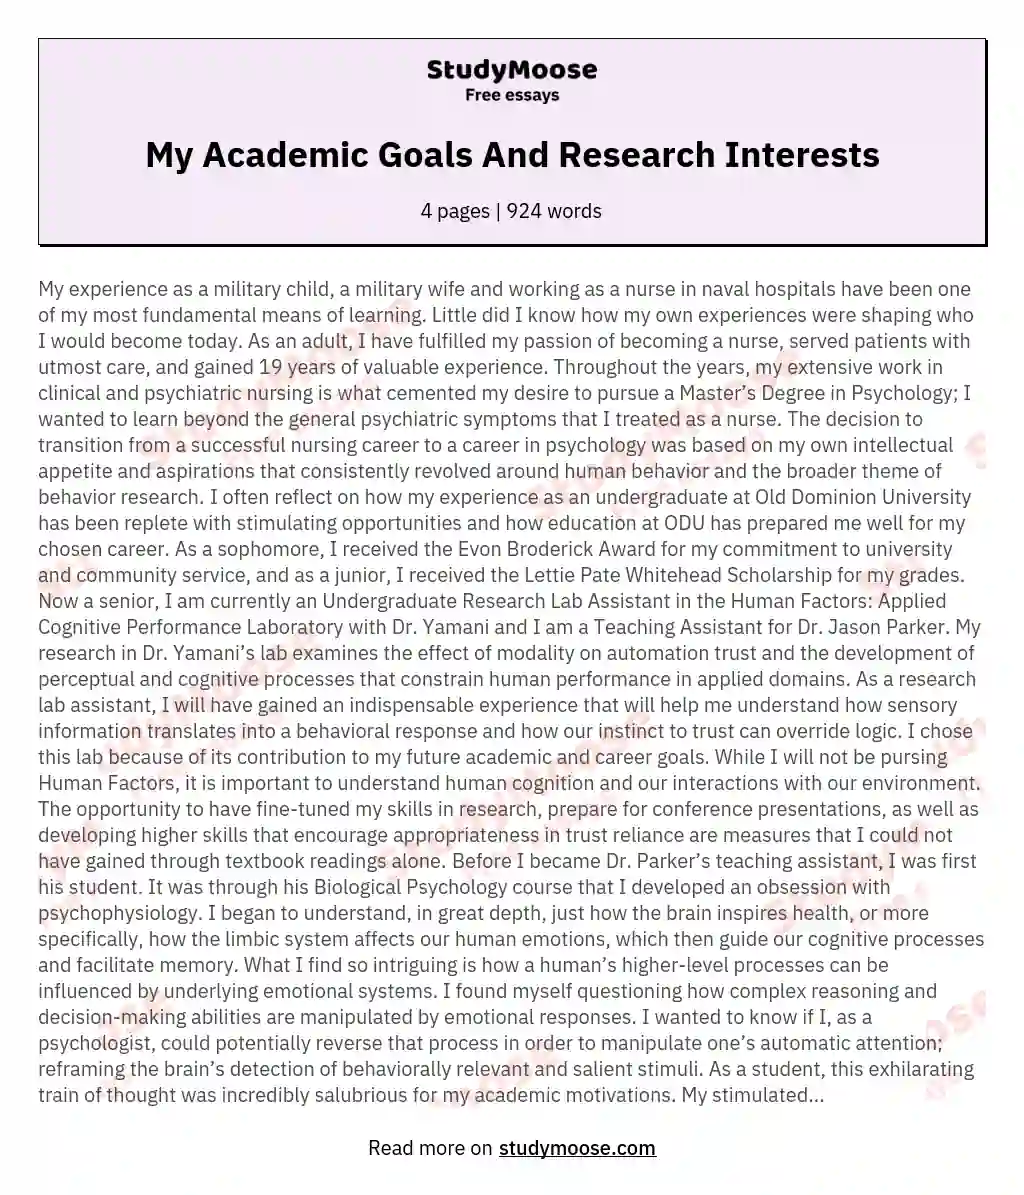 My Academic Goals And Research Interests essay